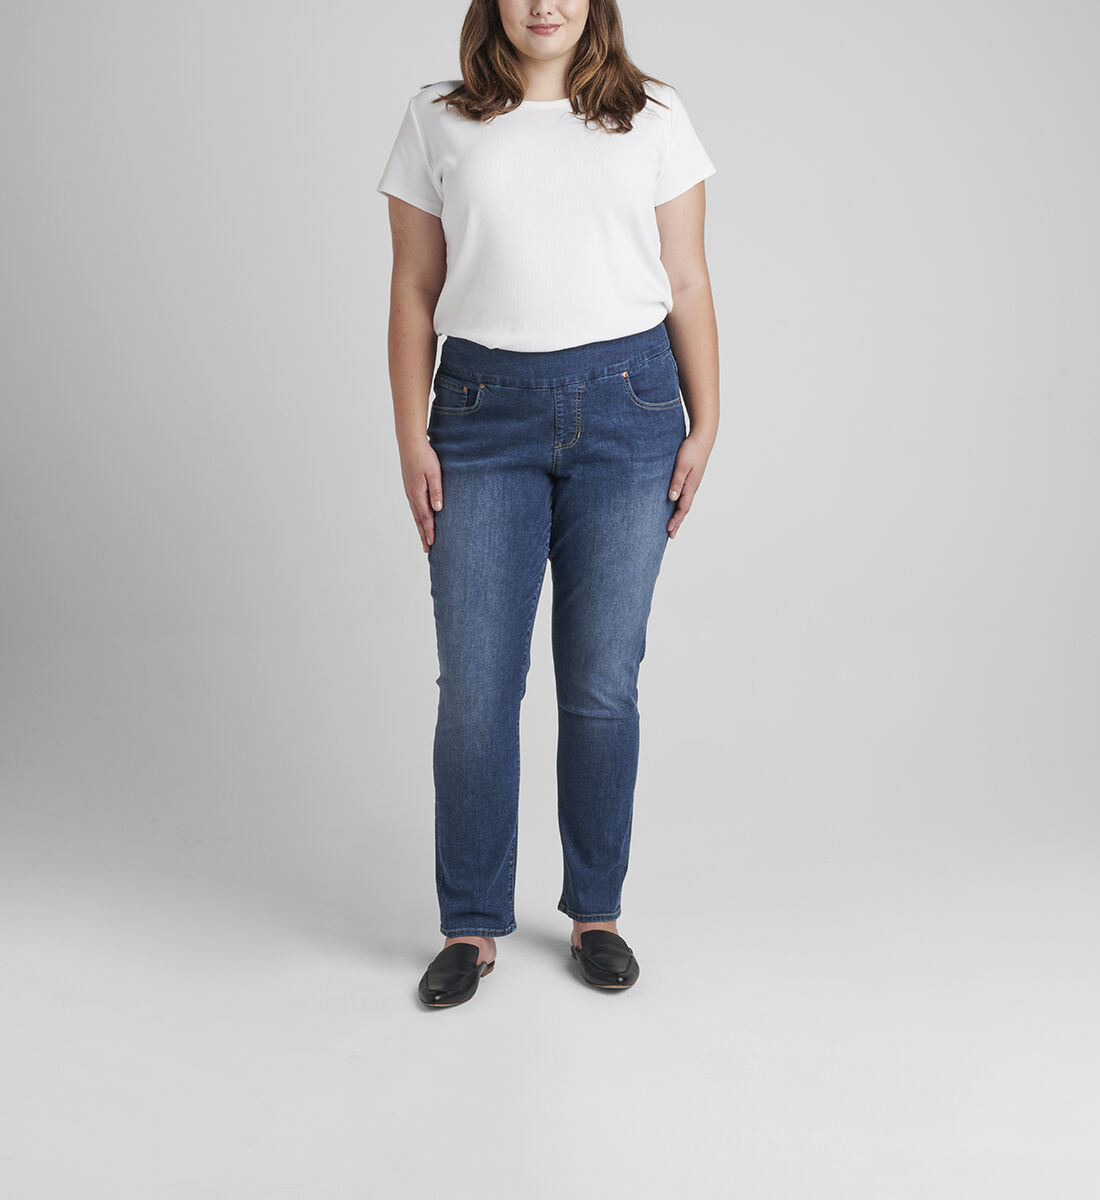 Nora Mid Rise Skinny Pull-On Jeans Plus Size Front